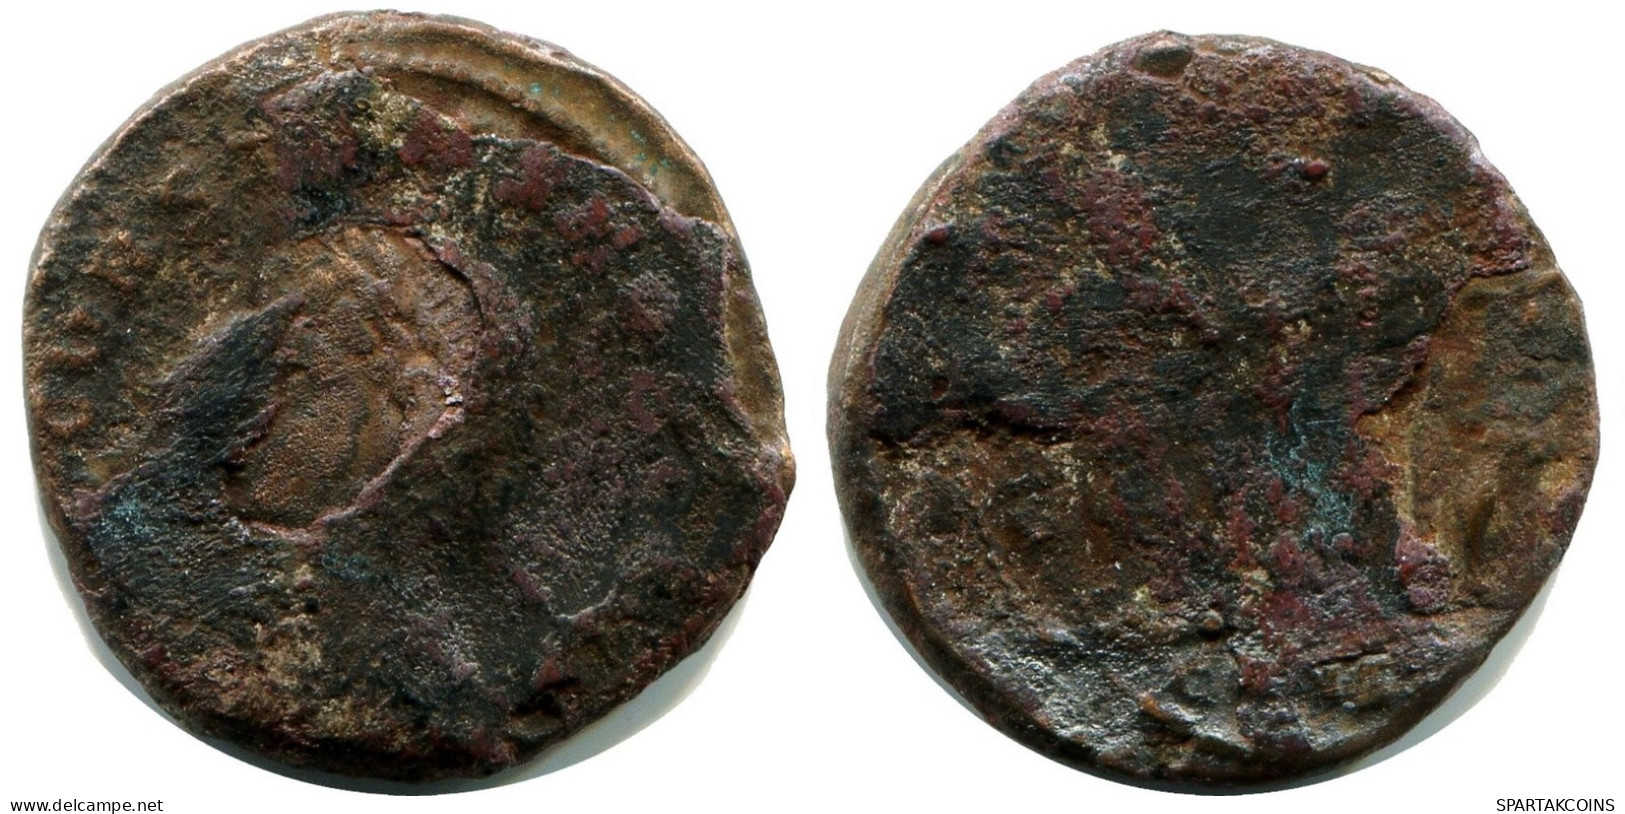 CONSTANS MINTED IN CONSTANTINOPLE FOUND IN IHNASYAH HOARD EGYPT #ANC11953.14.F.A - El Impero Christiano (307 / 363)